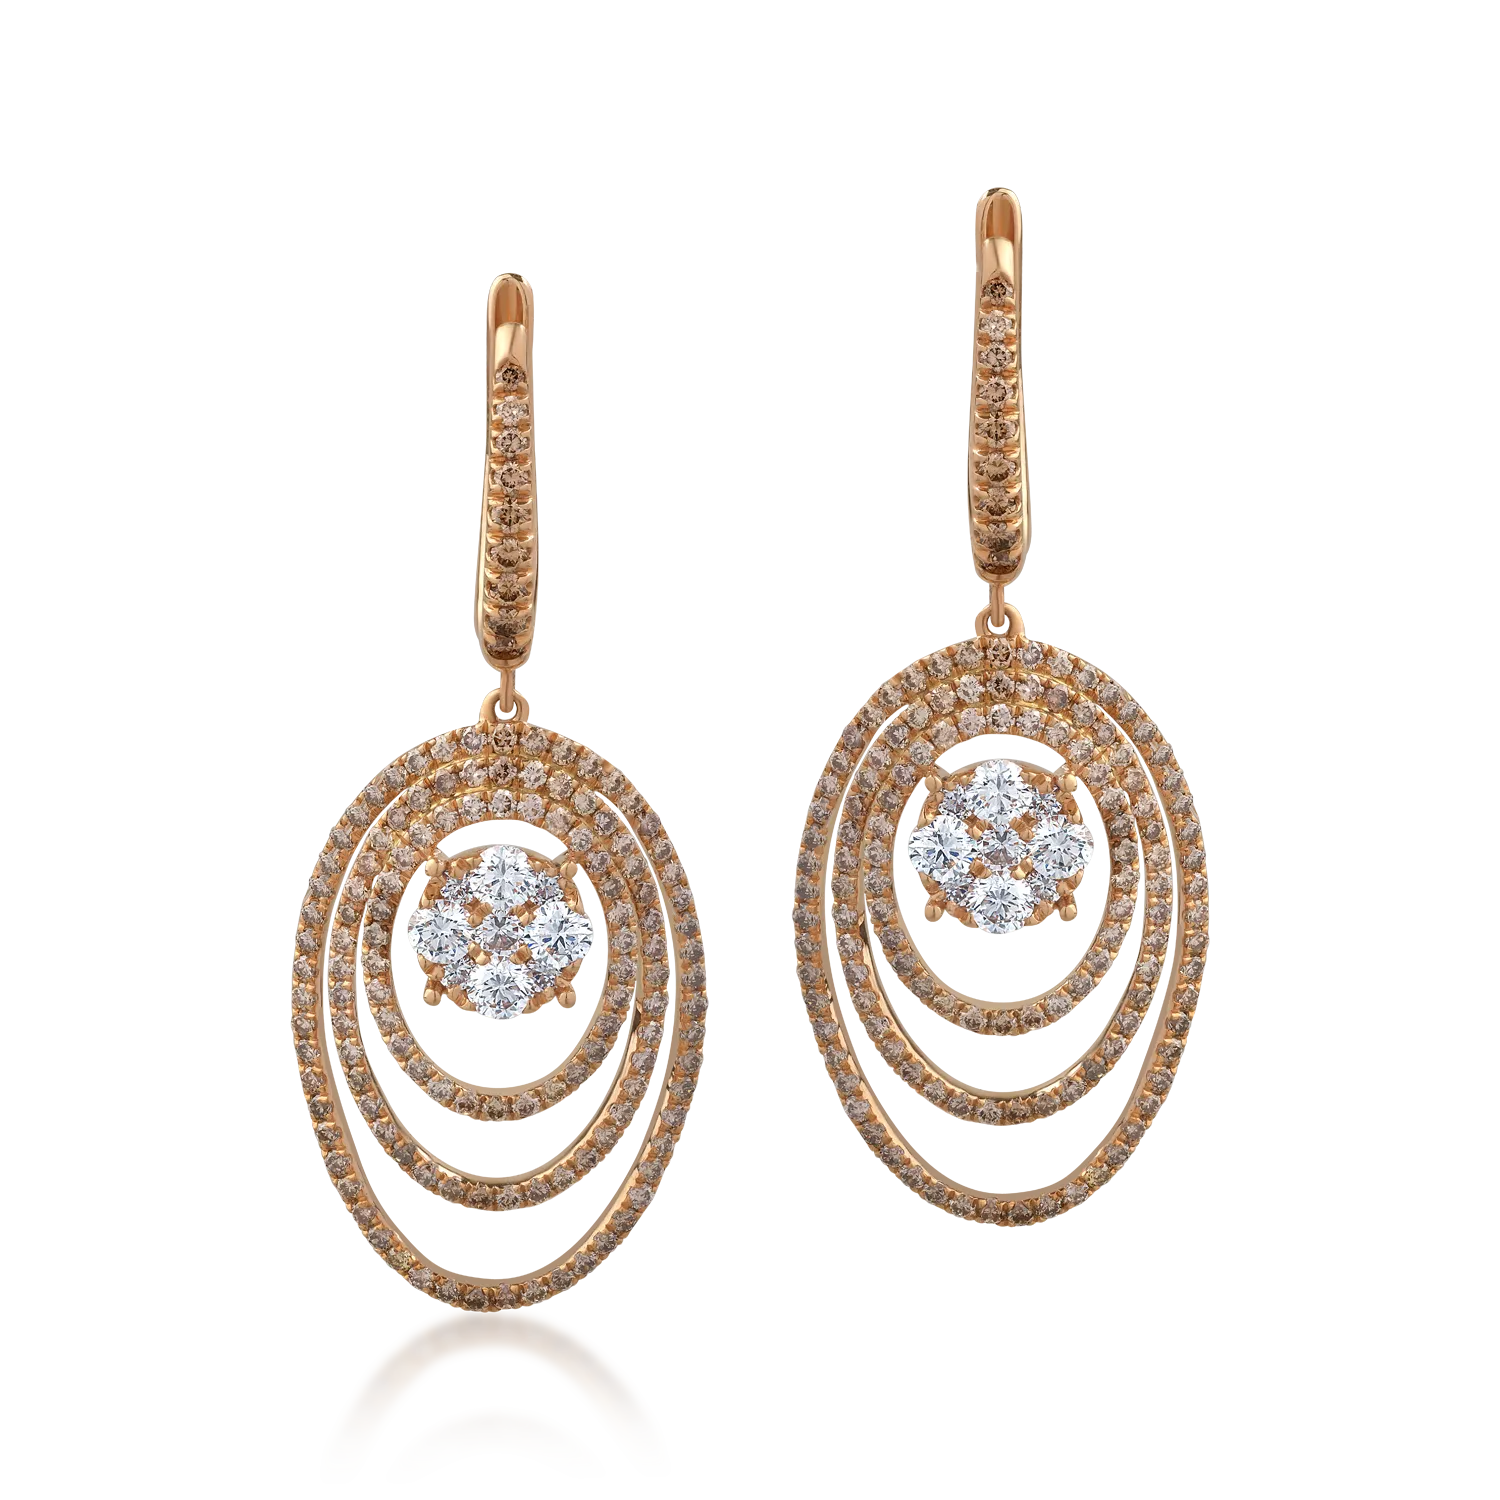 18K rose gold earrings with 0.88ct clear diamonds and 1.45ct brown diamonds